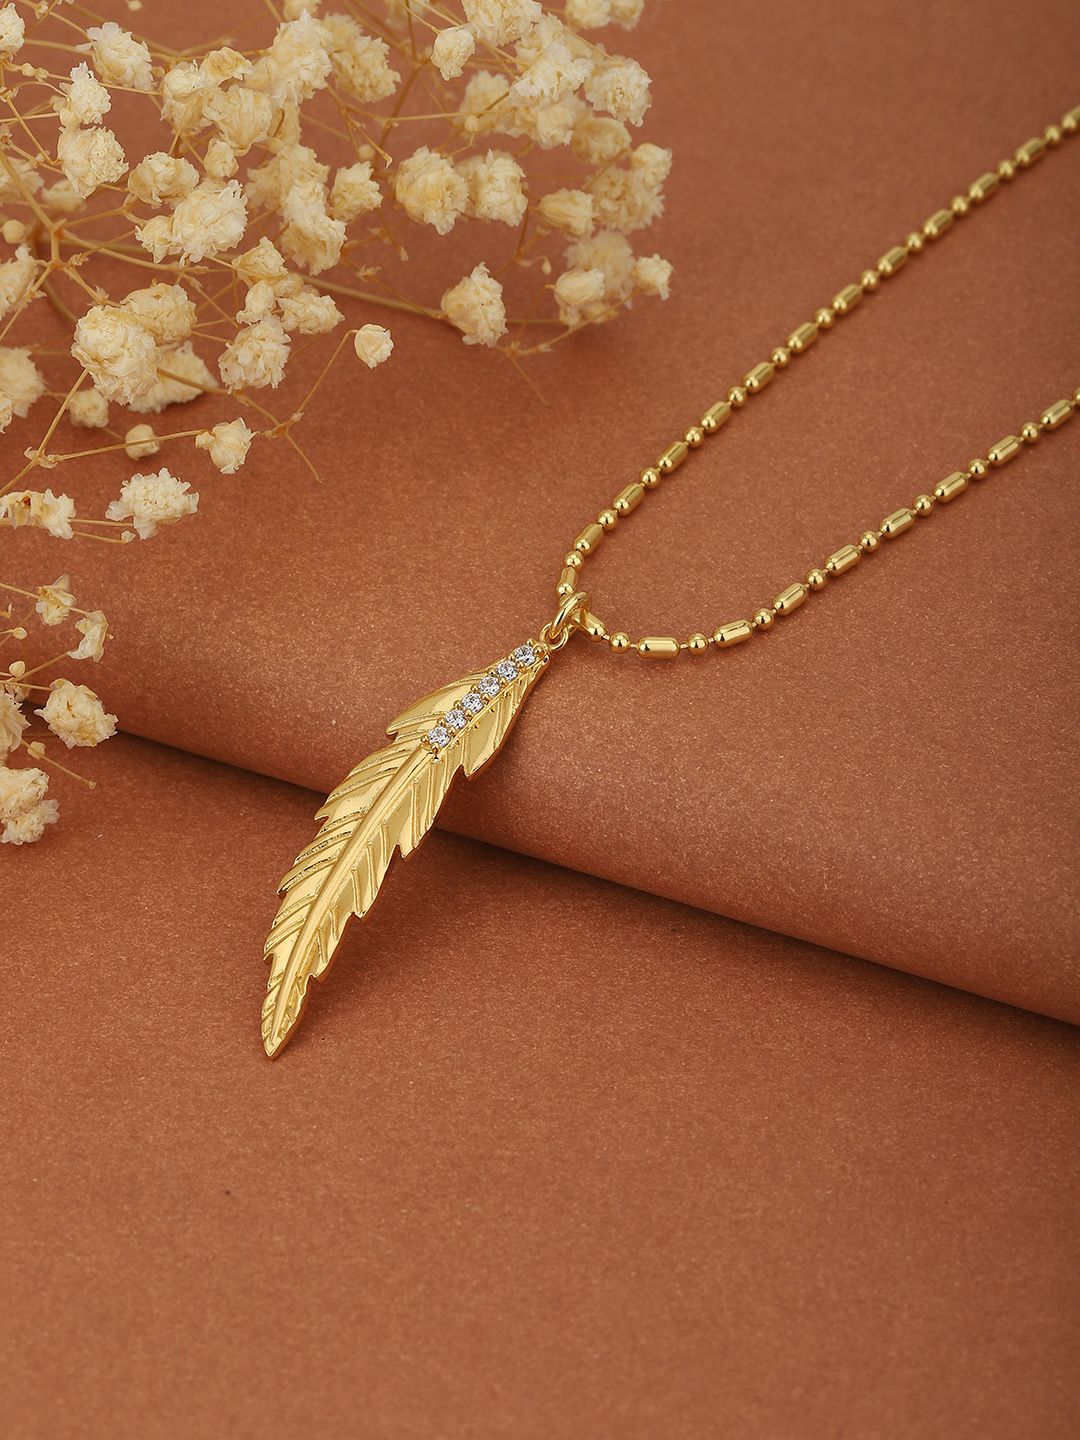 Carlton London Gold-Plated Brass Long Necklace Price in India